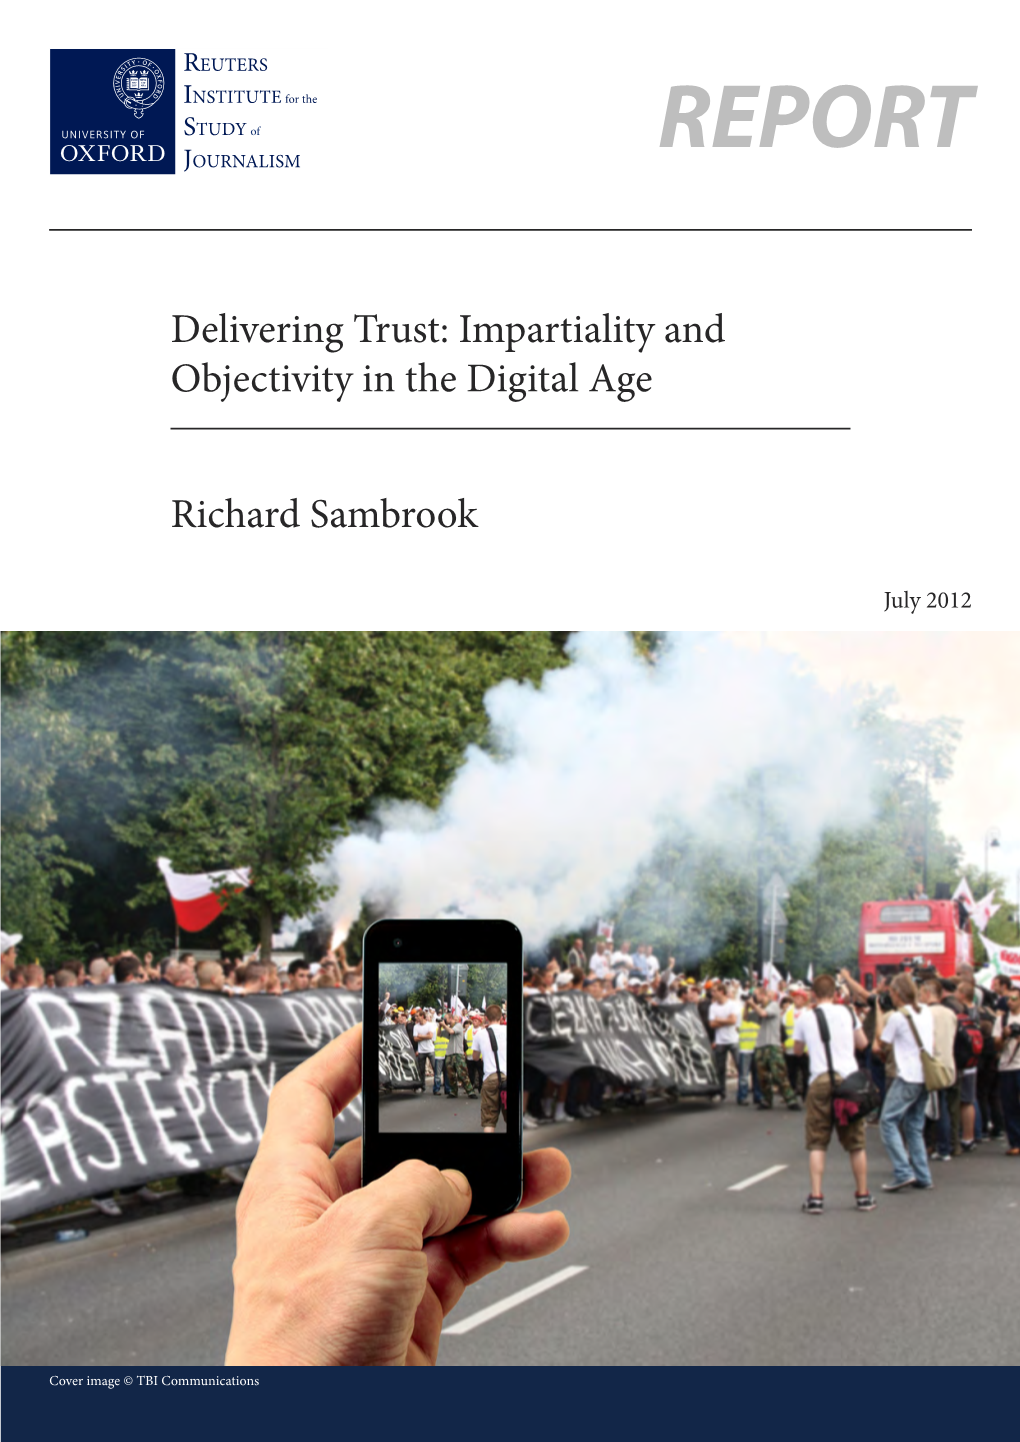 Impartiality and Objectivity in the Digital Age